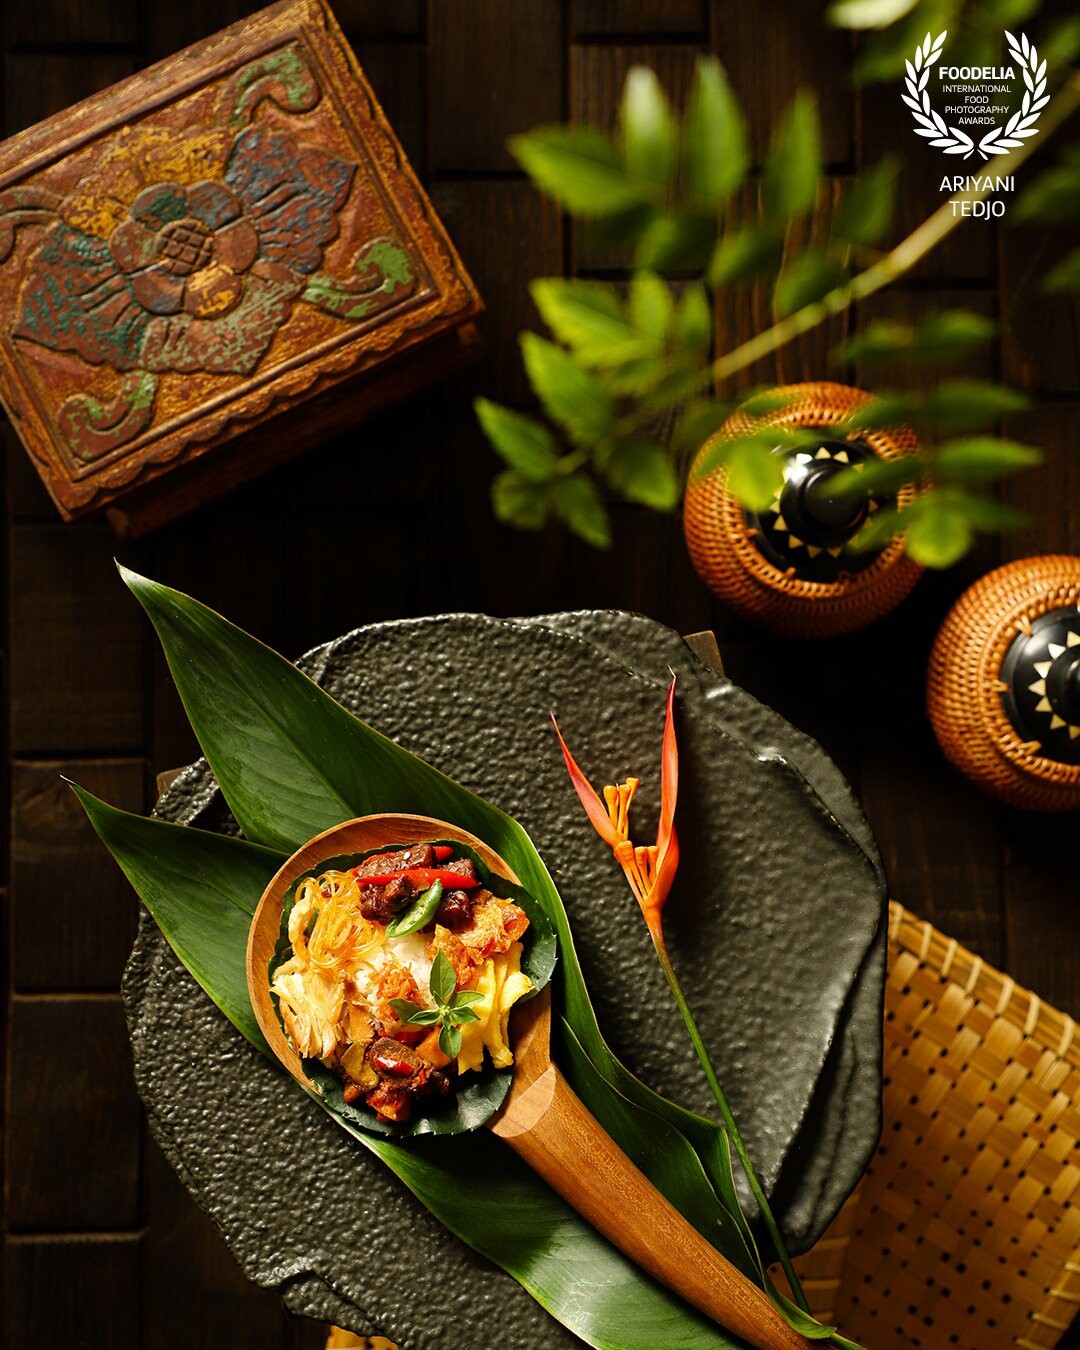 A traditional rice meal called Nasi Langgi, popular in Semarang, Central Java. Fragrant and savory rice topped with braised chicken, spicy liver stew, tempeh, glass noodles, potato crisps and omelet. This rice meal is served on a large wooden spoon lined with plum aralia leaf. Underneath the wooden spoon are two decorative banana leaves. The decorative banana blossom is placed on the plate next to the spoon.